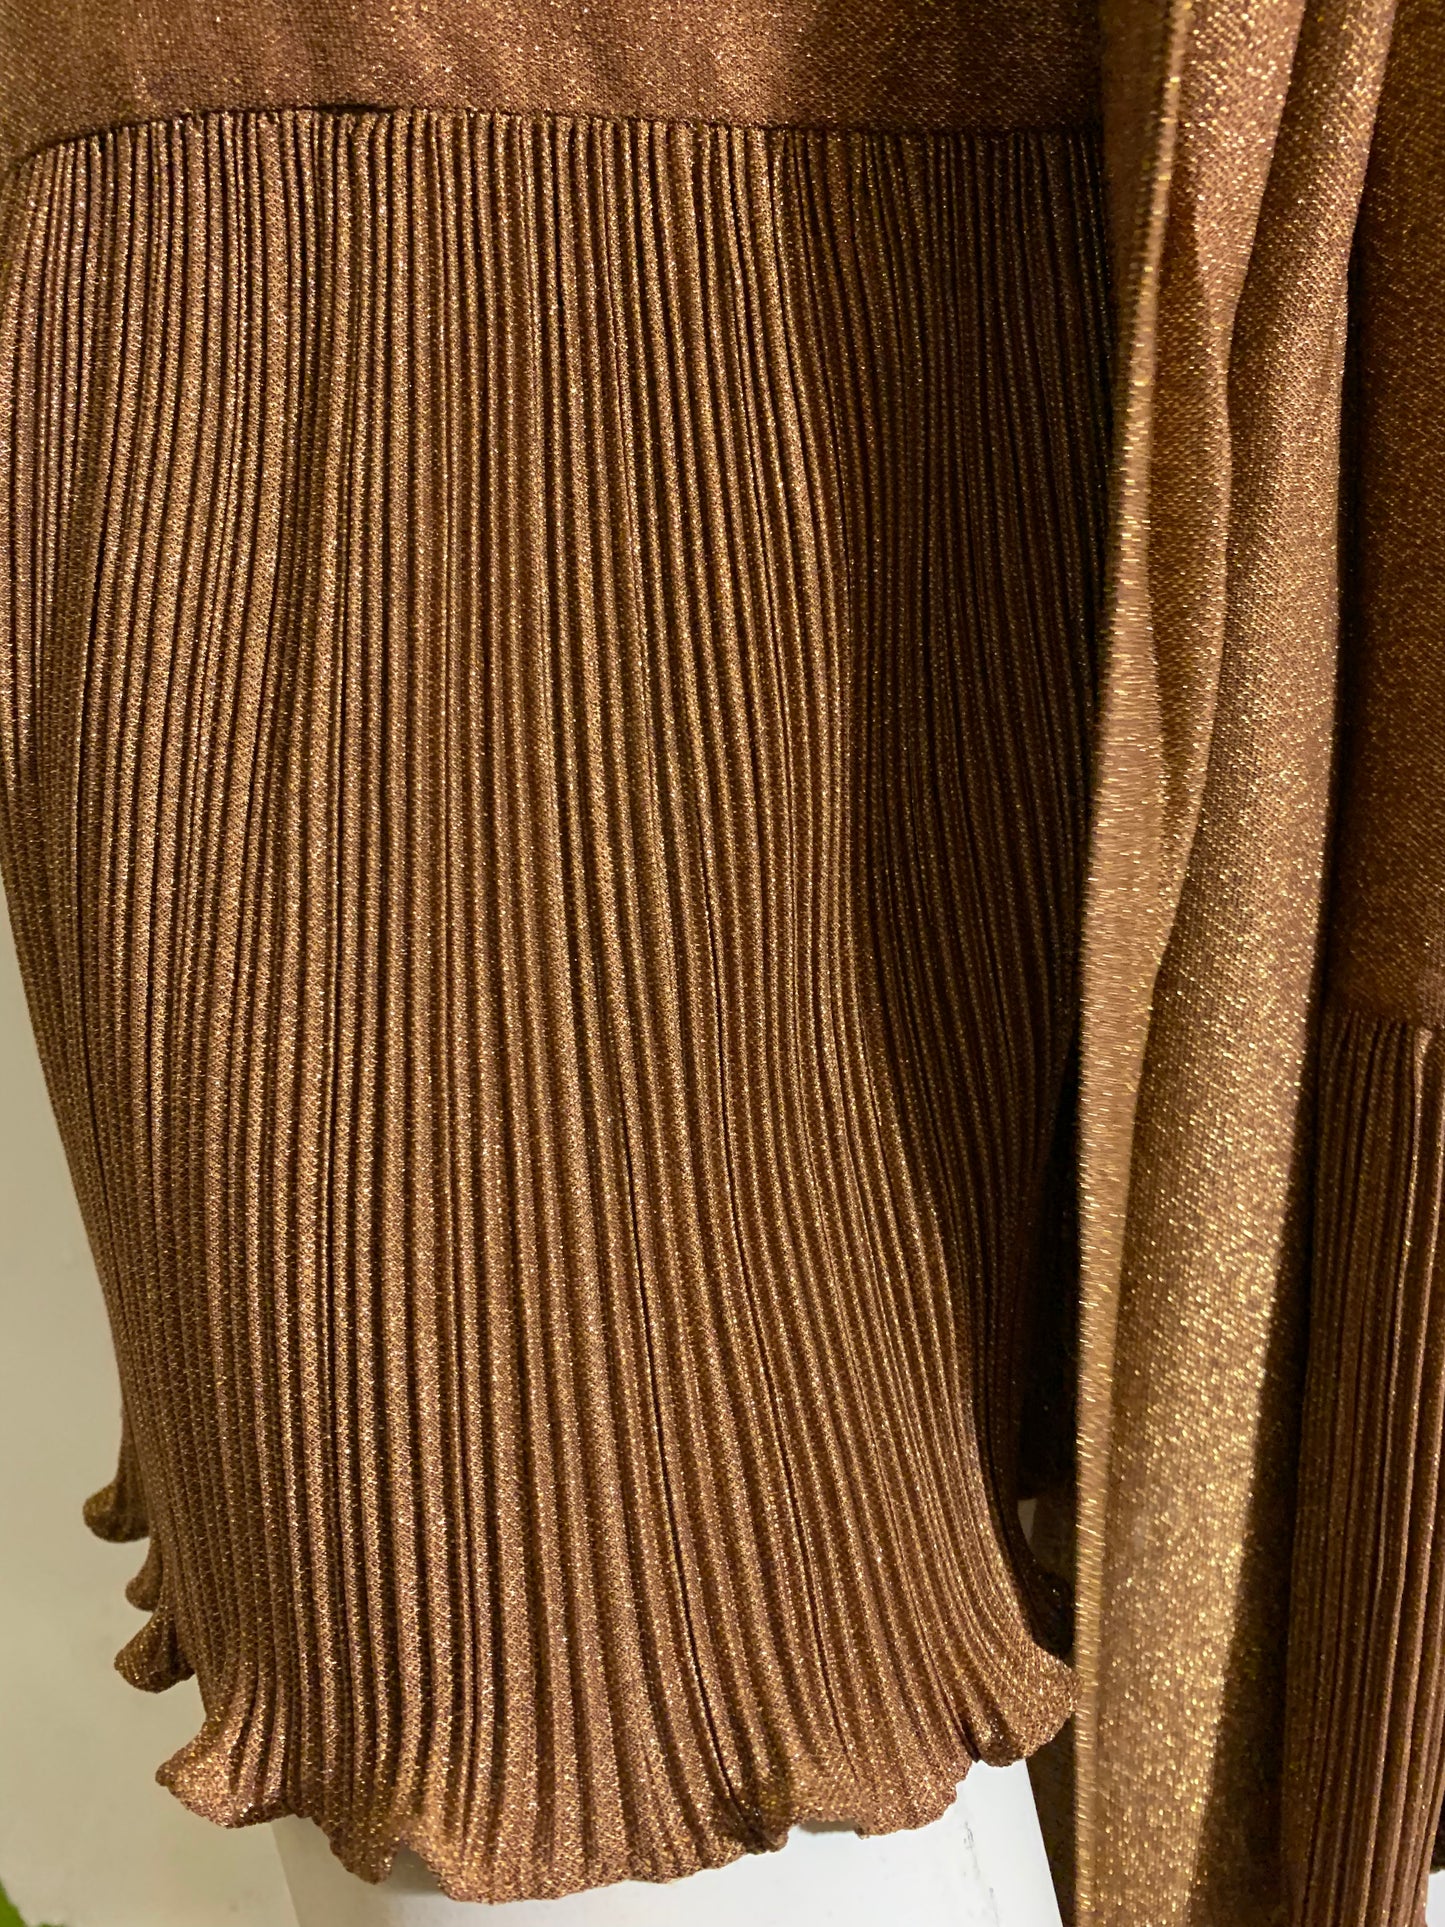 Amber Gold Lurex Mini Cocktail Dress with Micropleated Hem and Sash circa 1960s